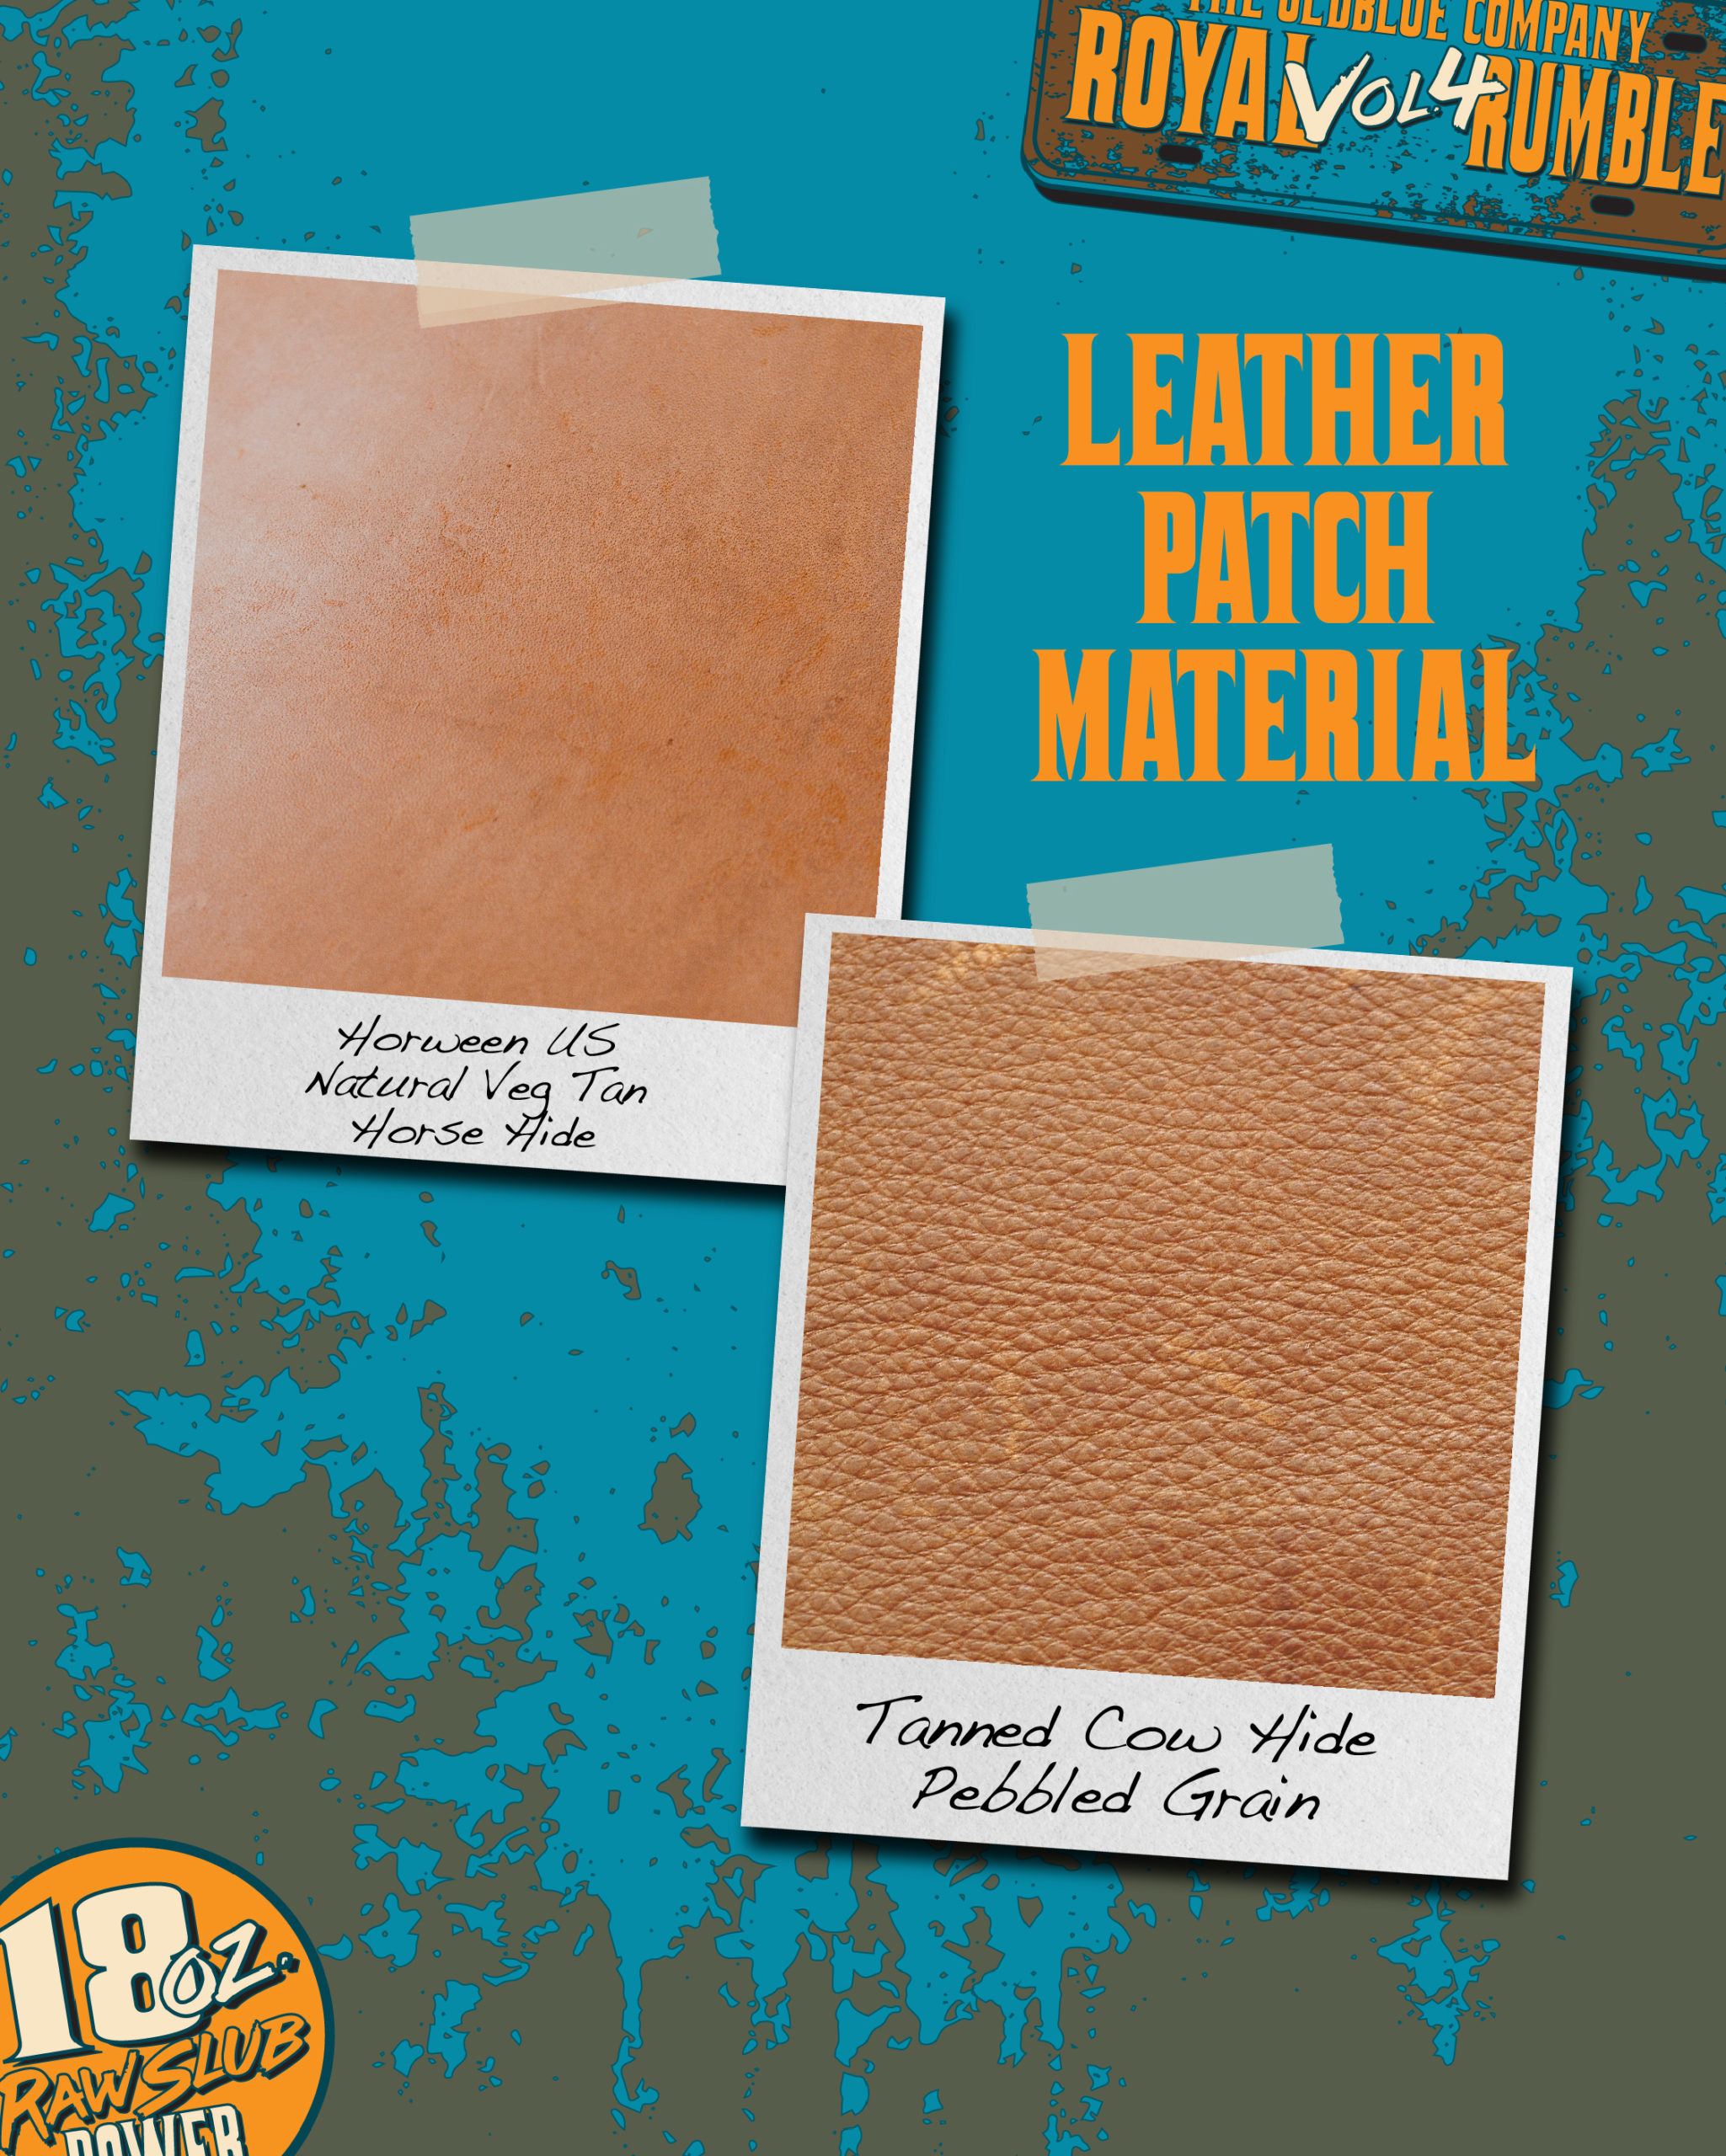 THE LEATHER PATCH MATERIAL